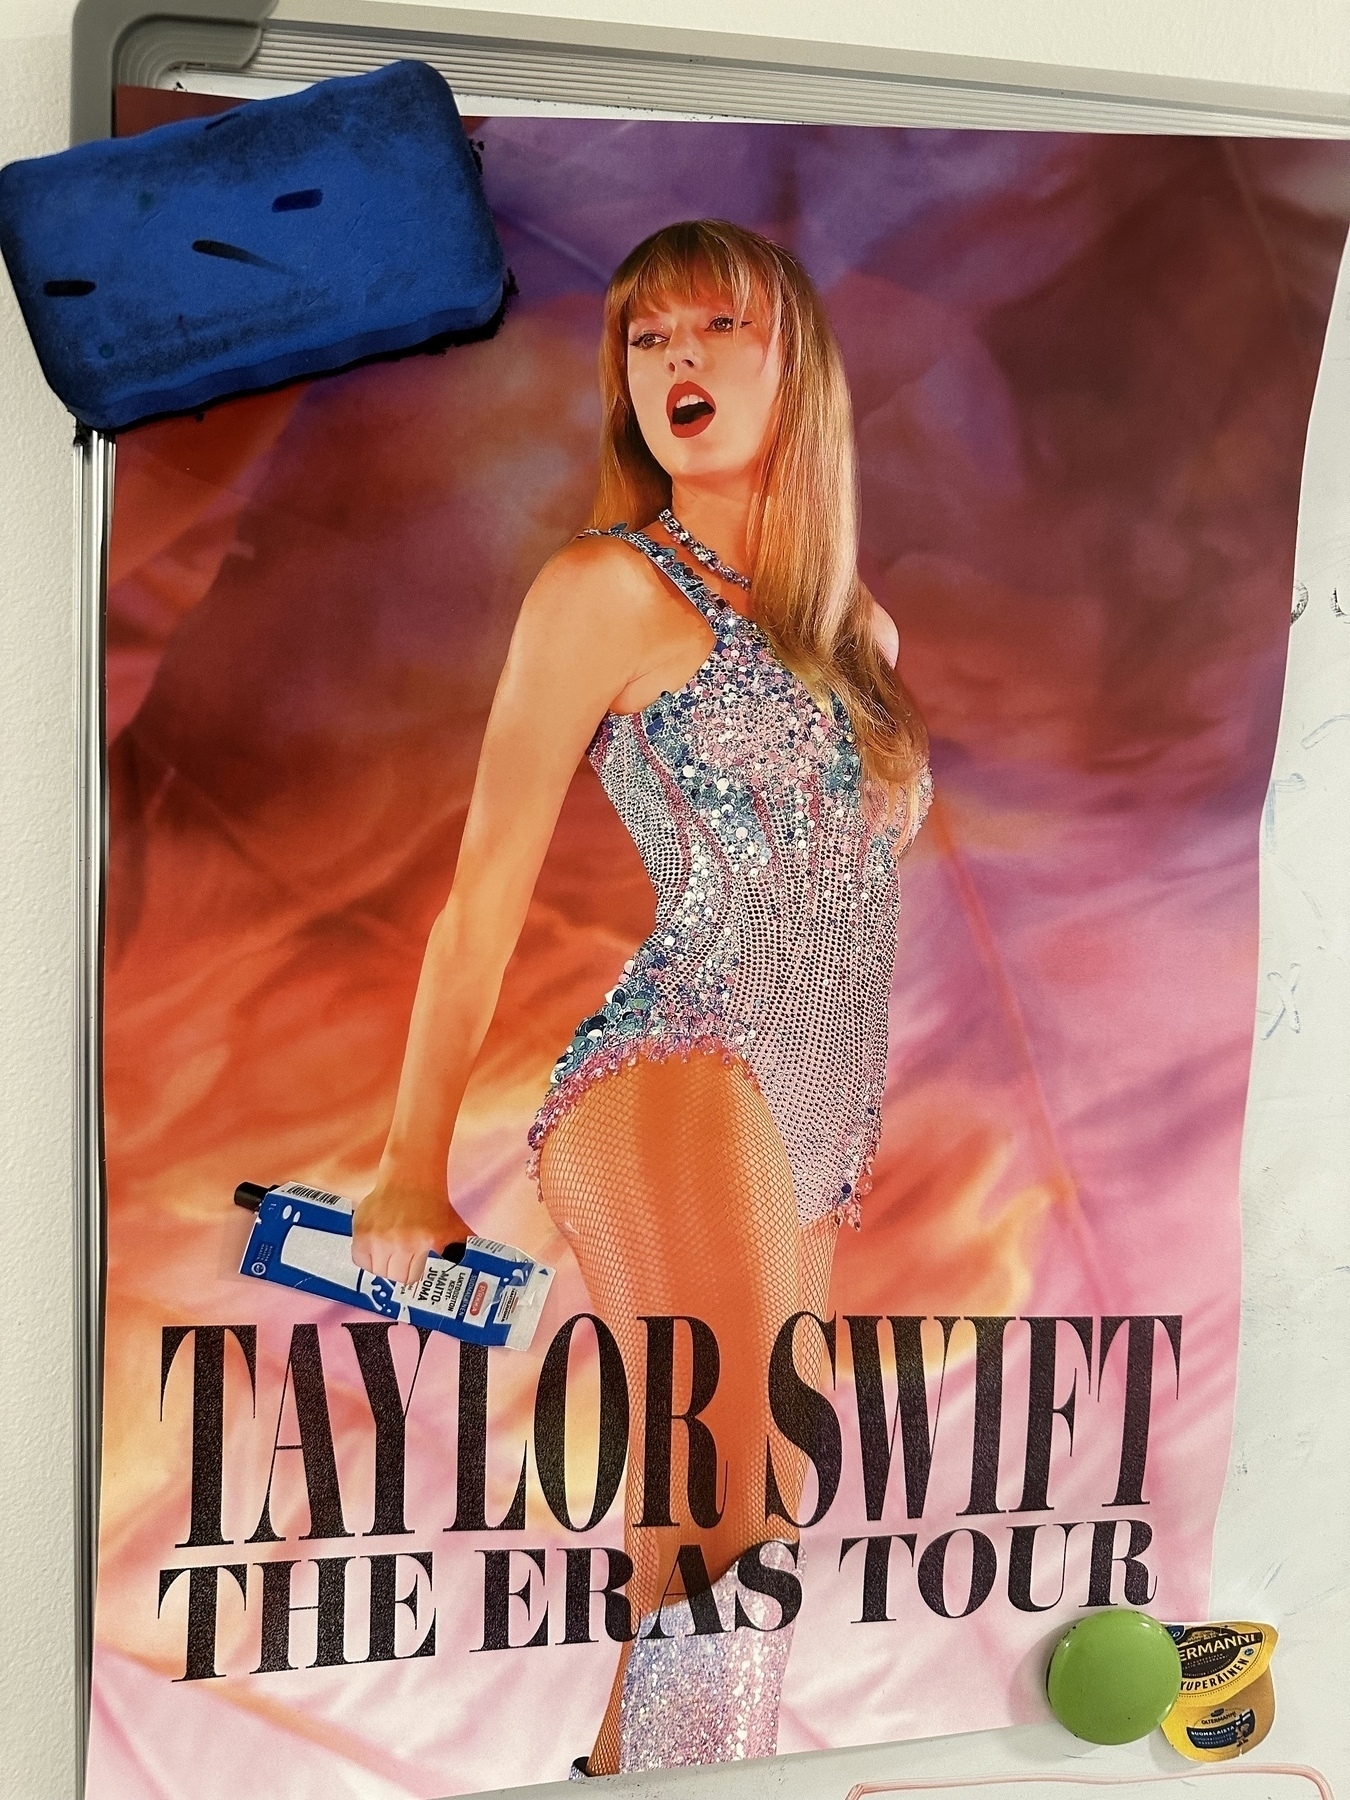 Taylor Swift Eras Tour miniposter on a whiteboard. Taylor looking right over her shoulder and instead of a microphone she has a carton of milk on her had. 